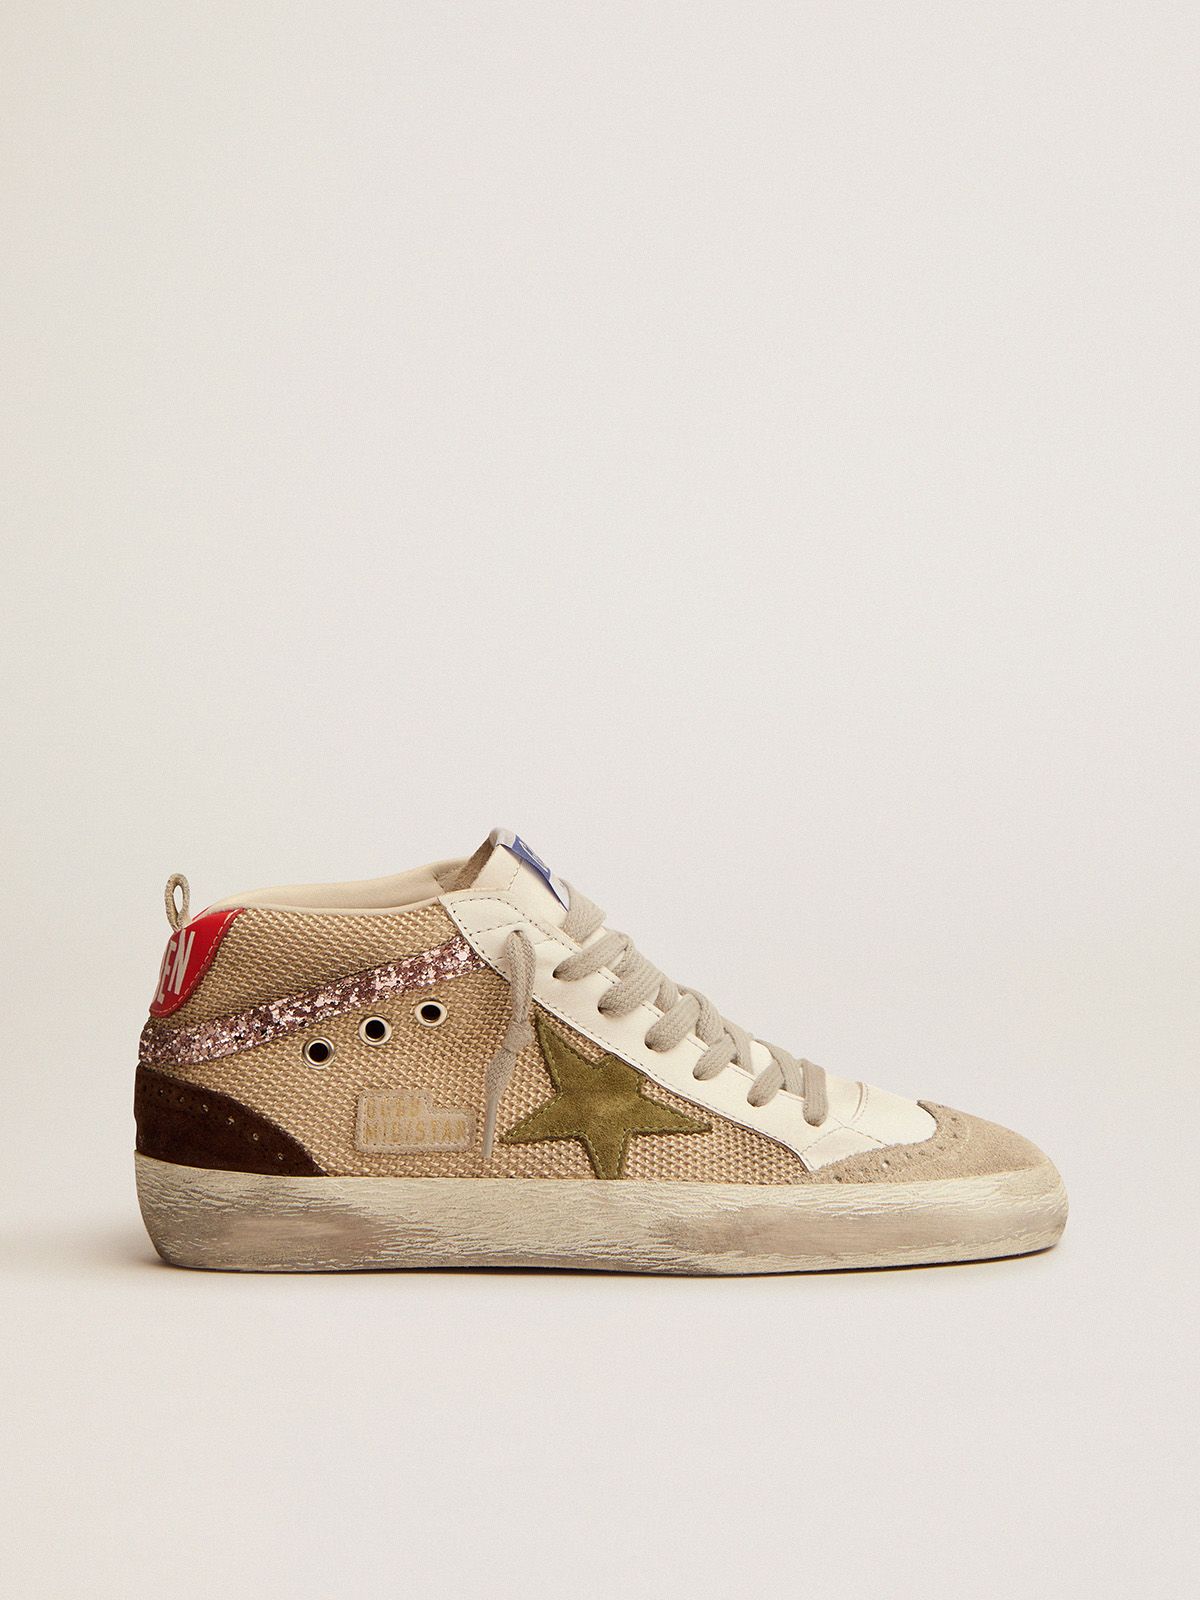 Golden Goose Sneakers Uomo Mid Star sneakers in cream-colored mesh with suede and glitter details